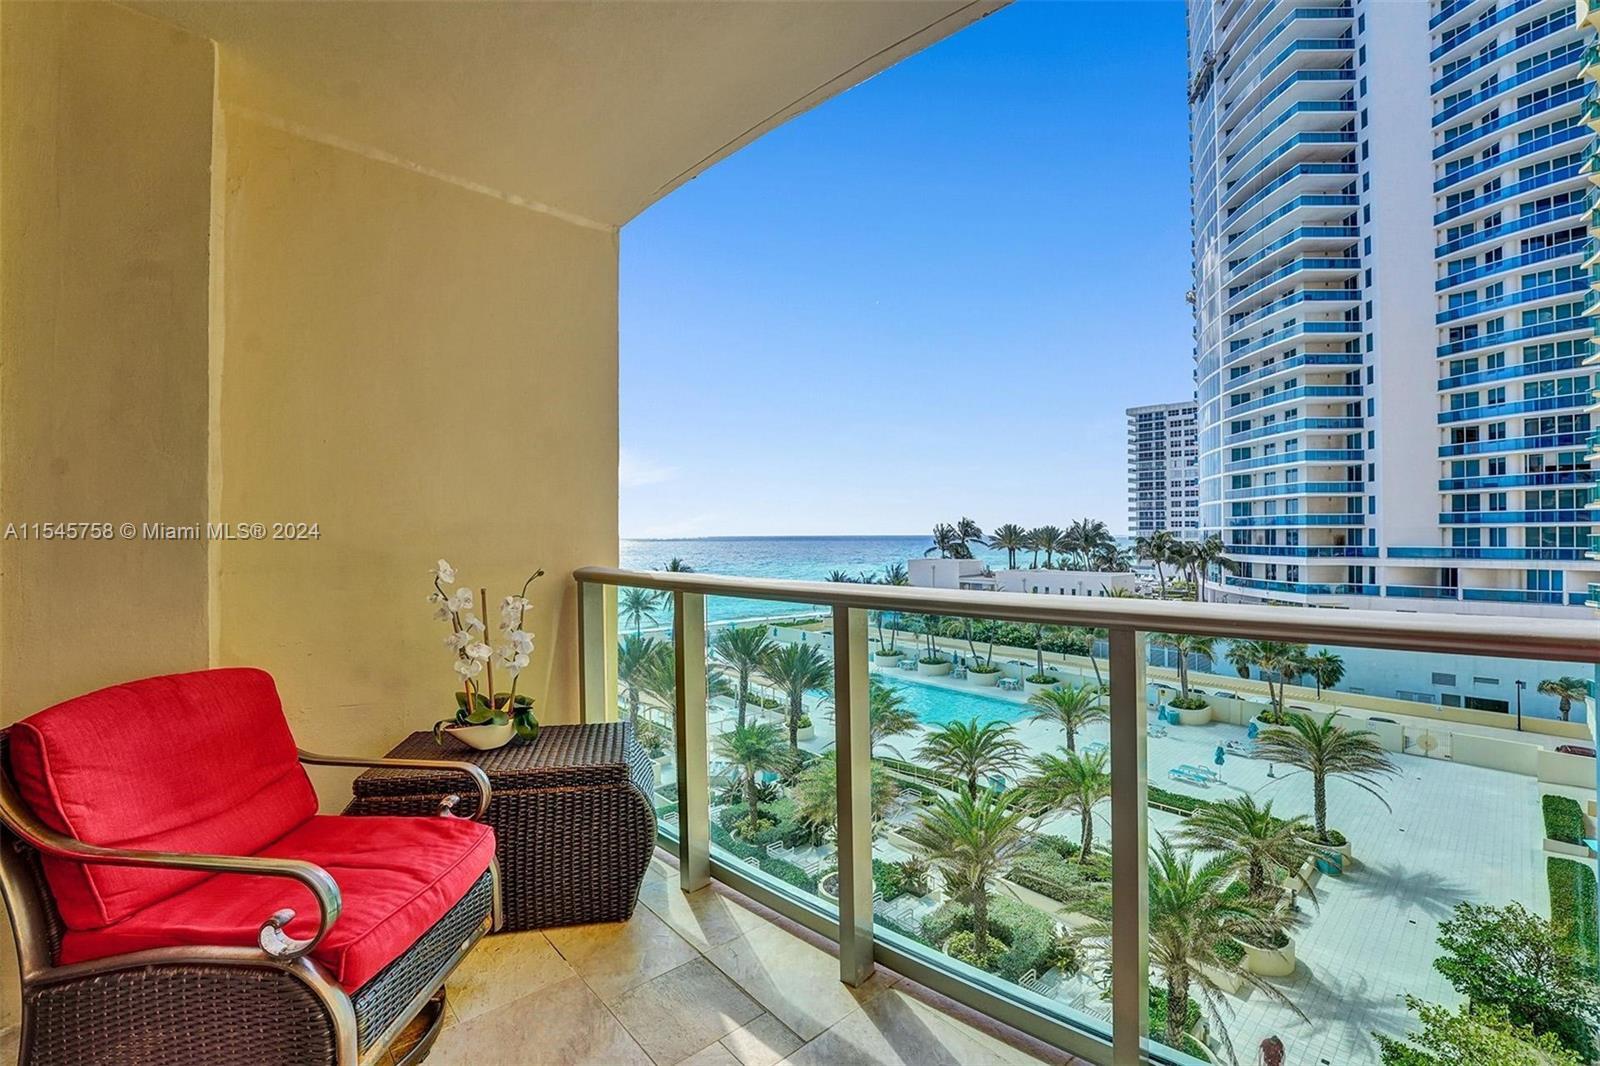 Photo of 2501 S Ocean Dr #618 (Available Sept 2) in Hollywood, FL